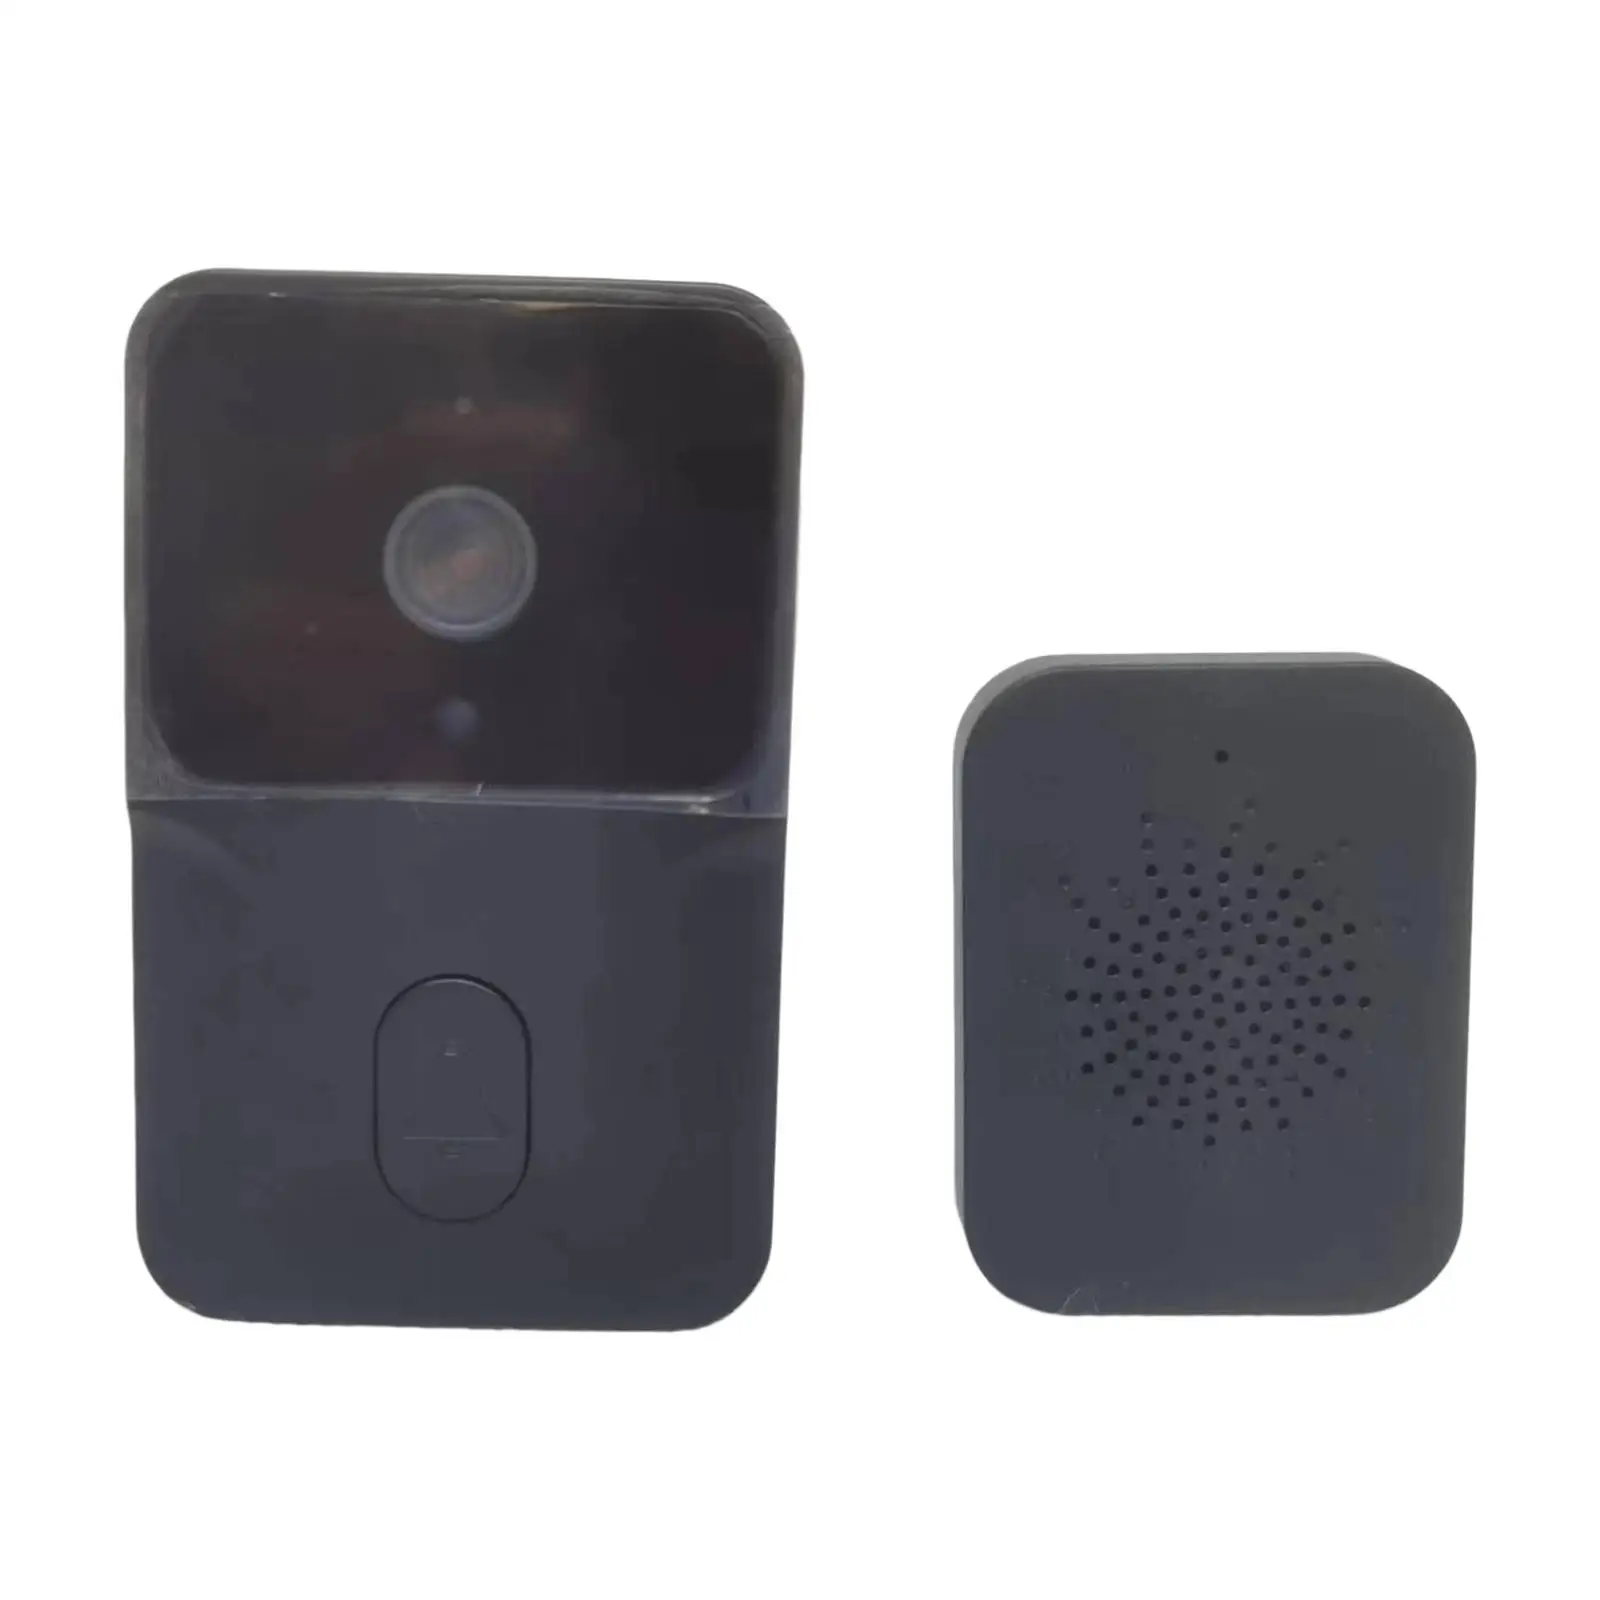 Doorbell Camera Wireless Easy Install Motion Detection WiFi Video Doorbell for Classroom Businesses Office Playhouse Home